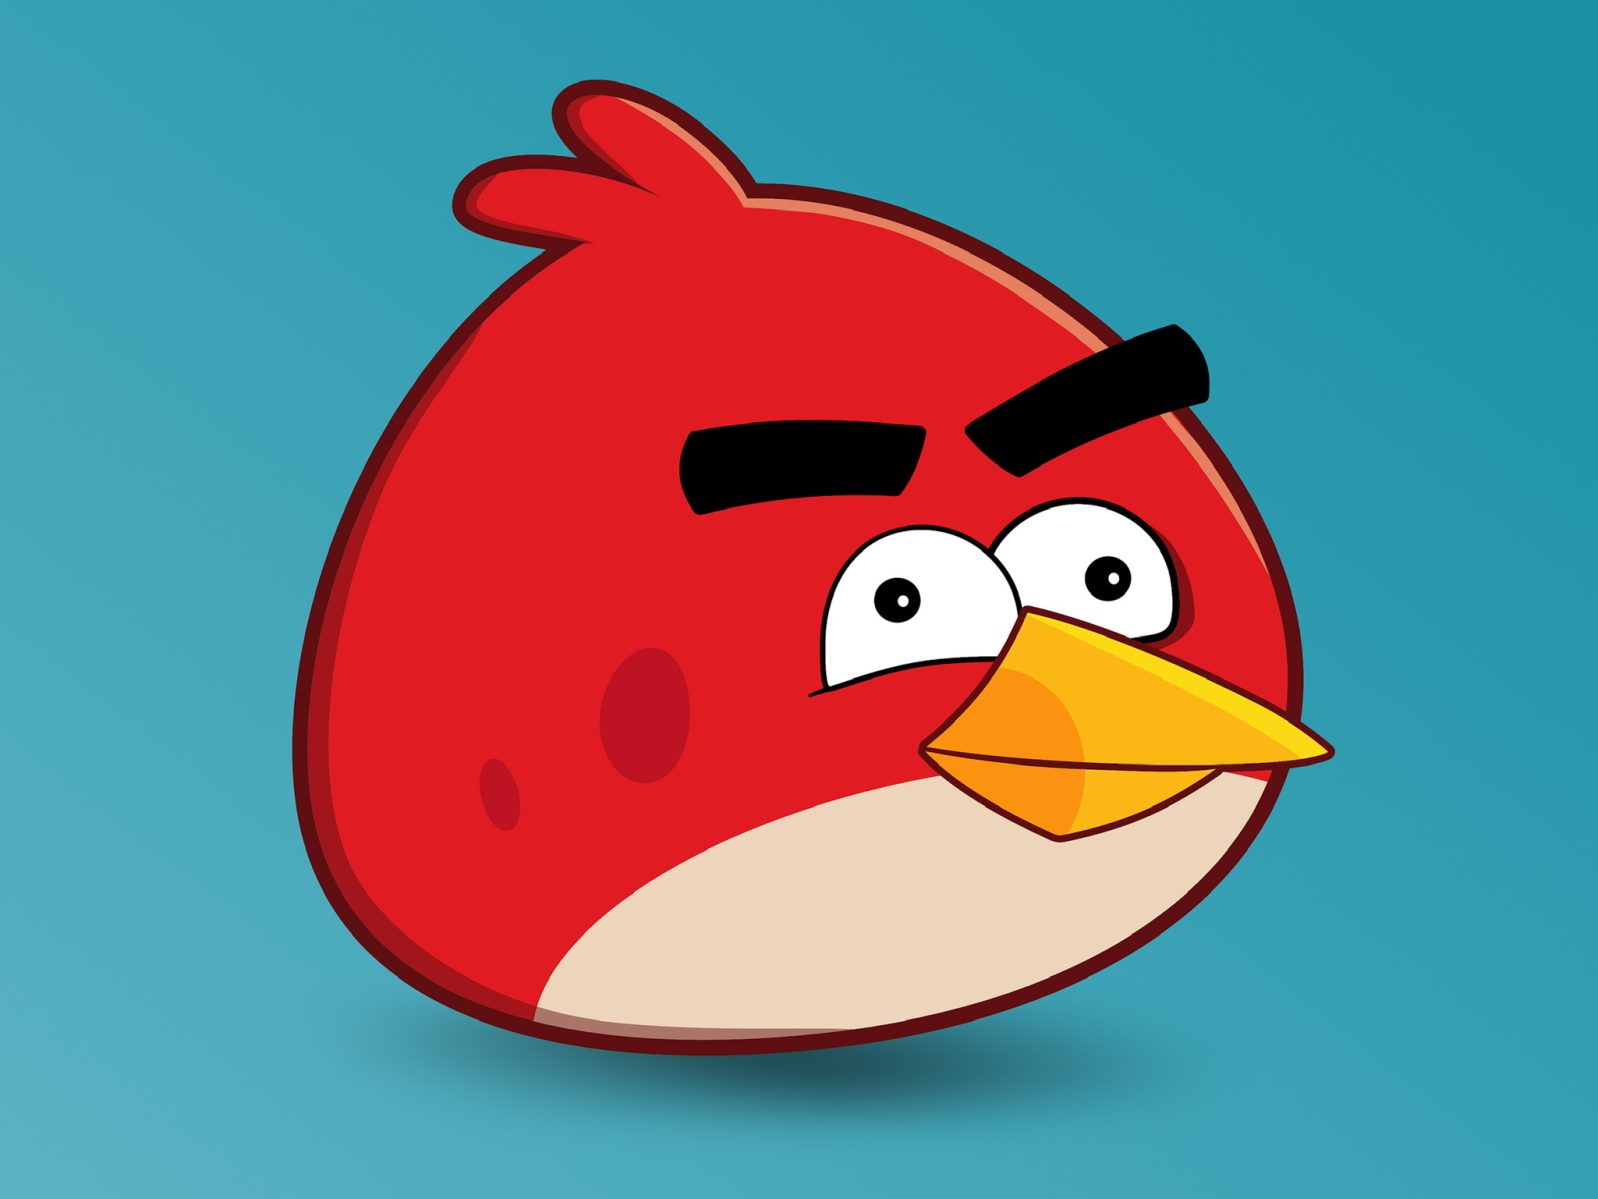 The Red Angry Bird by Thorsten Kamann on Dribbble